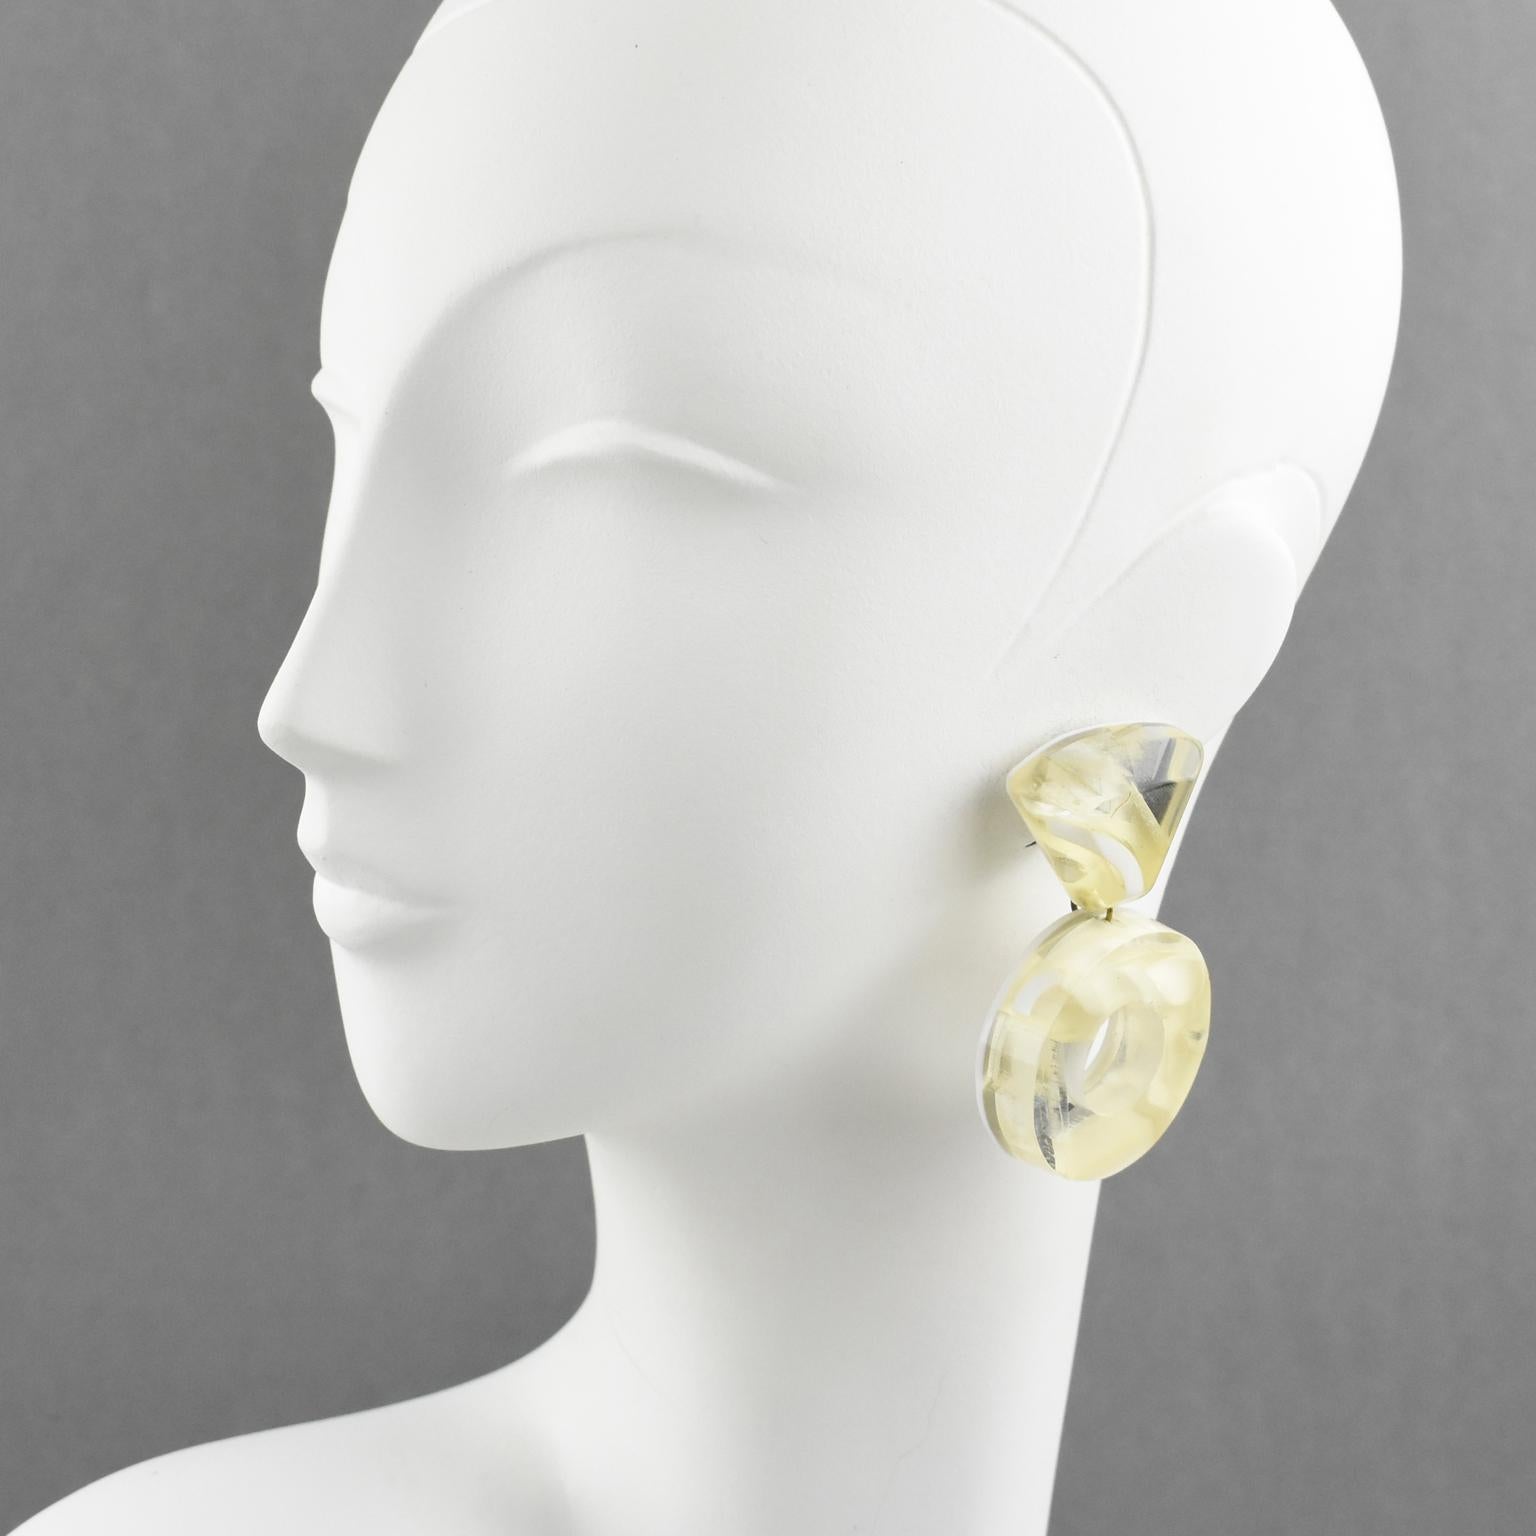 Harriet Bauknight for Kaso designed these stunning lucite clip-on earrings. The giant donut dangling shape with a geometric design features dimensional multilayer Lucite with inclusions. The pieces have a contrasted pattern in a mirror effect, a